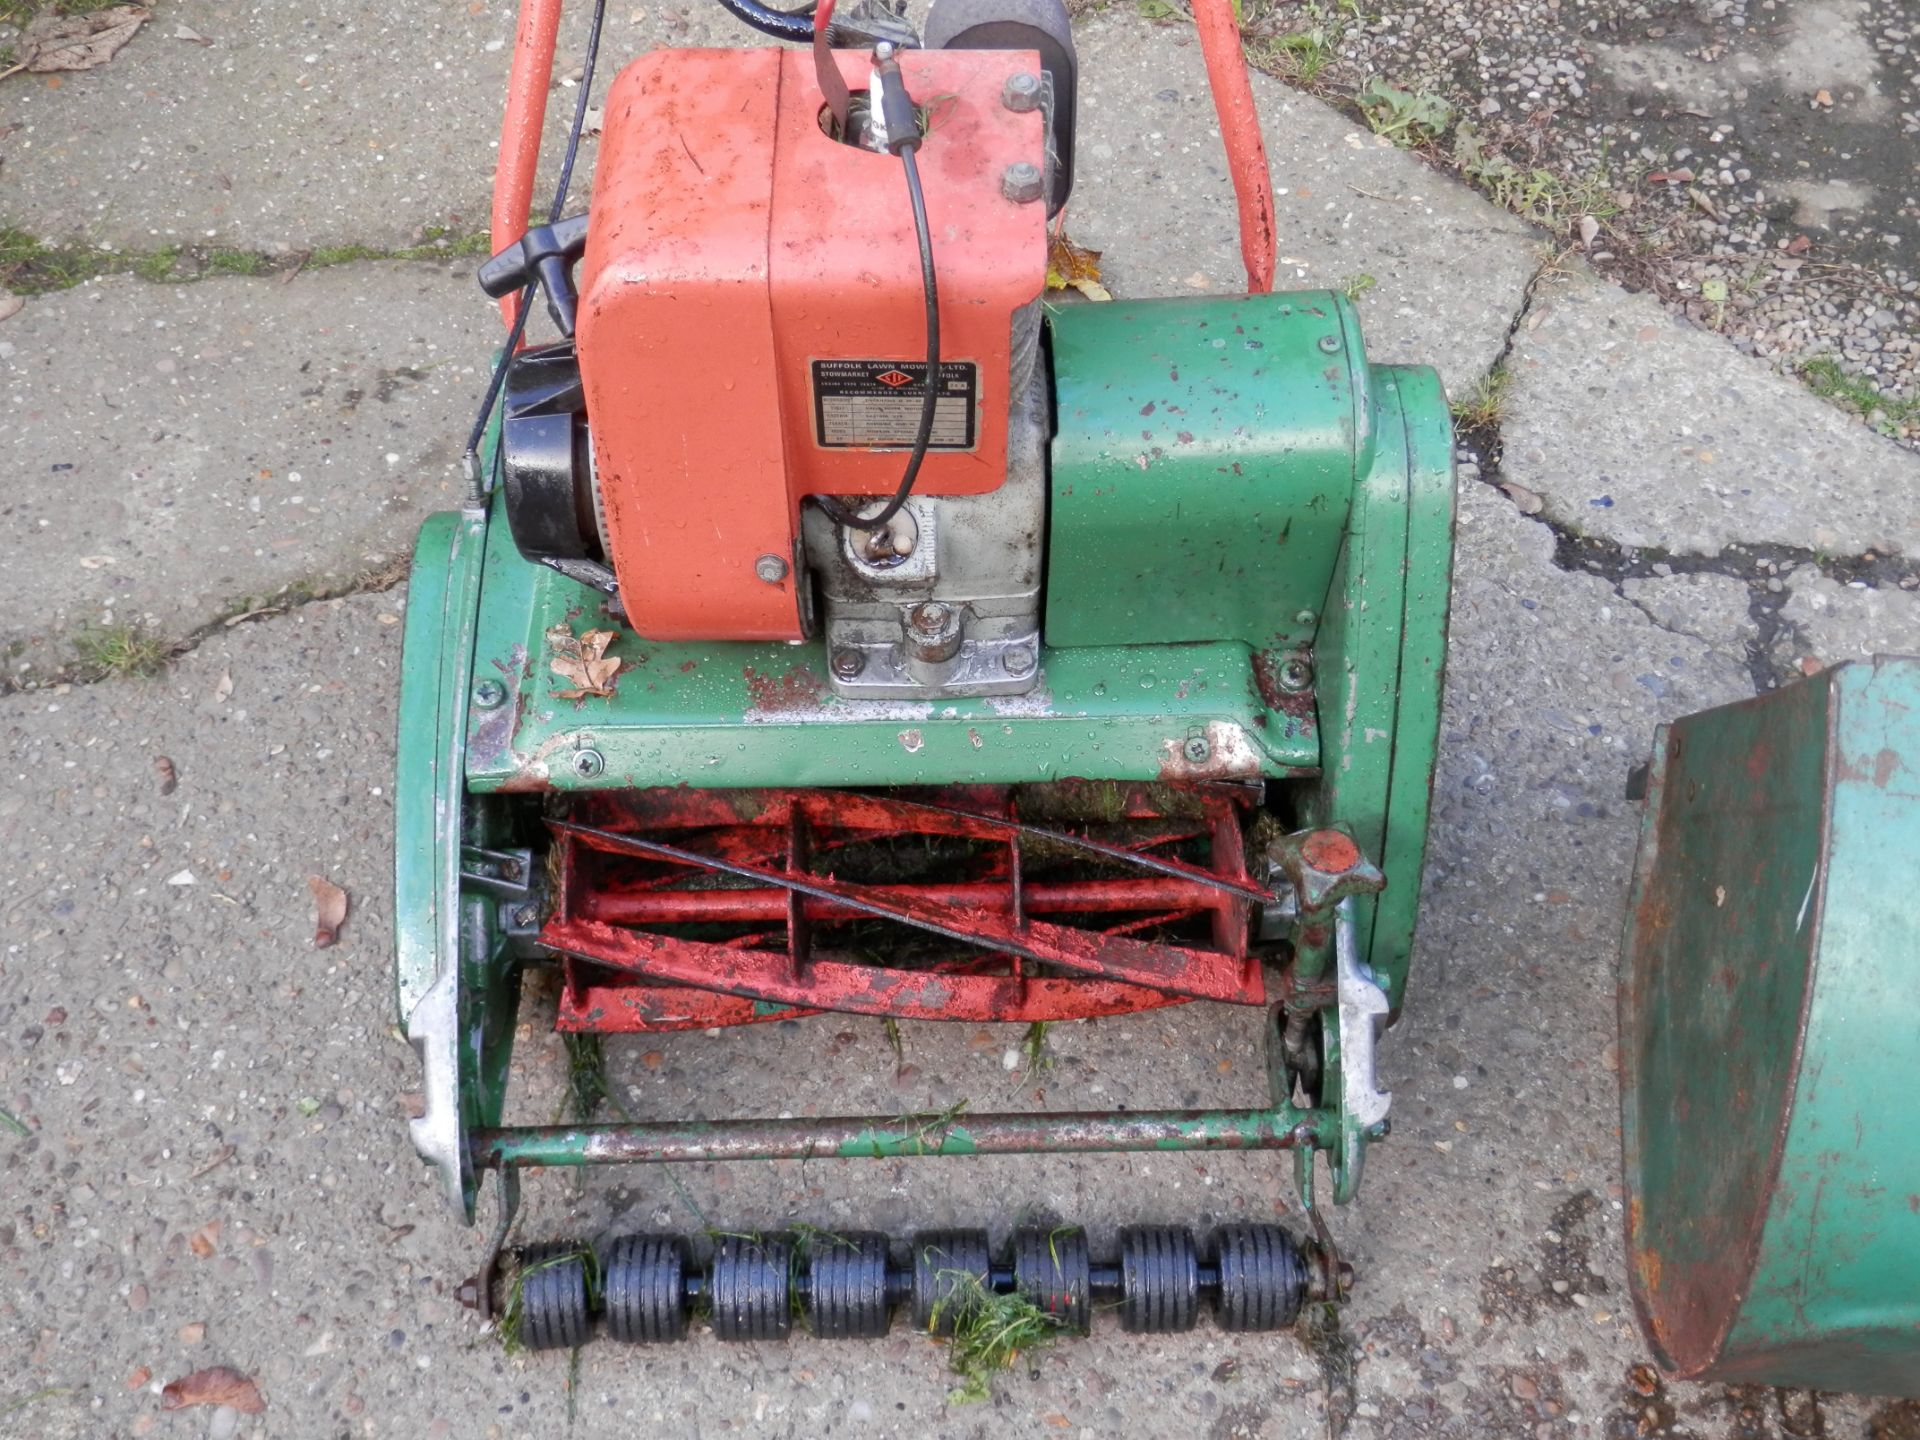 1960S WORKING VINTAGE SUFFOLK "PUNCH" PETROL 14" SELF PROPELLED LAWN MOVER. - Image 4 of 11